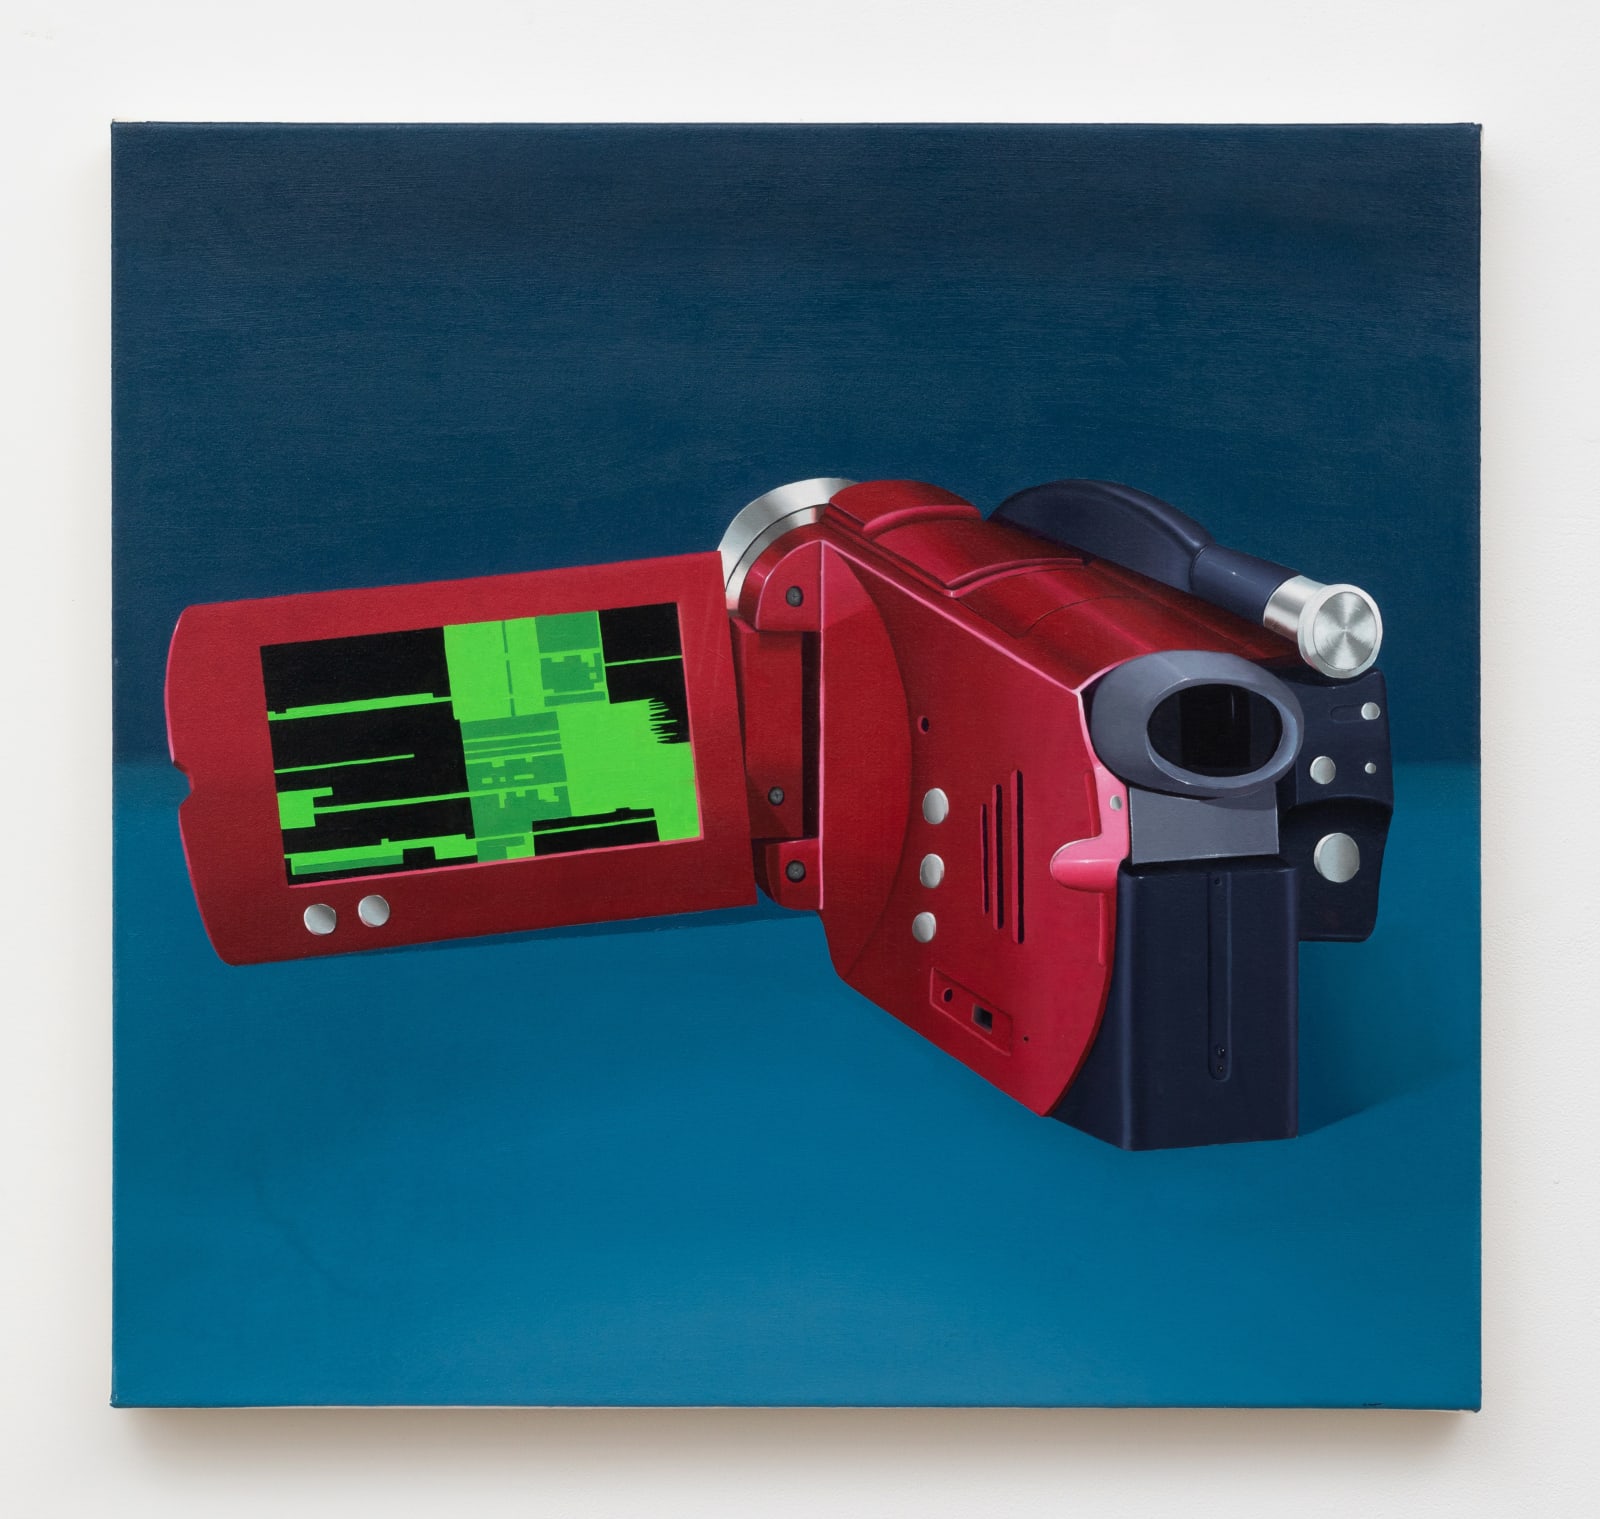 Painting portraying a red video camcorder against a blue background, with a glitchy screen of green and black pixelations.